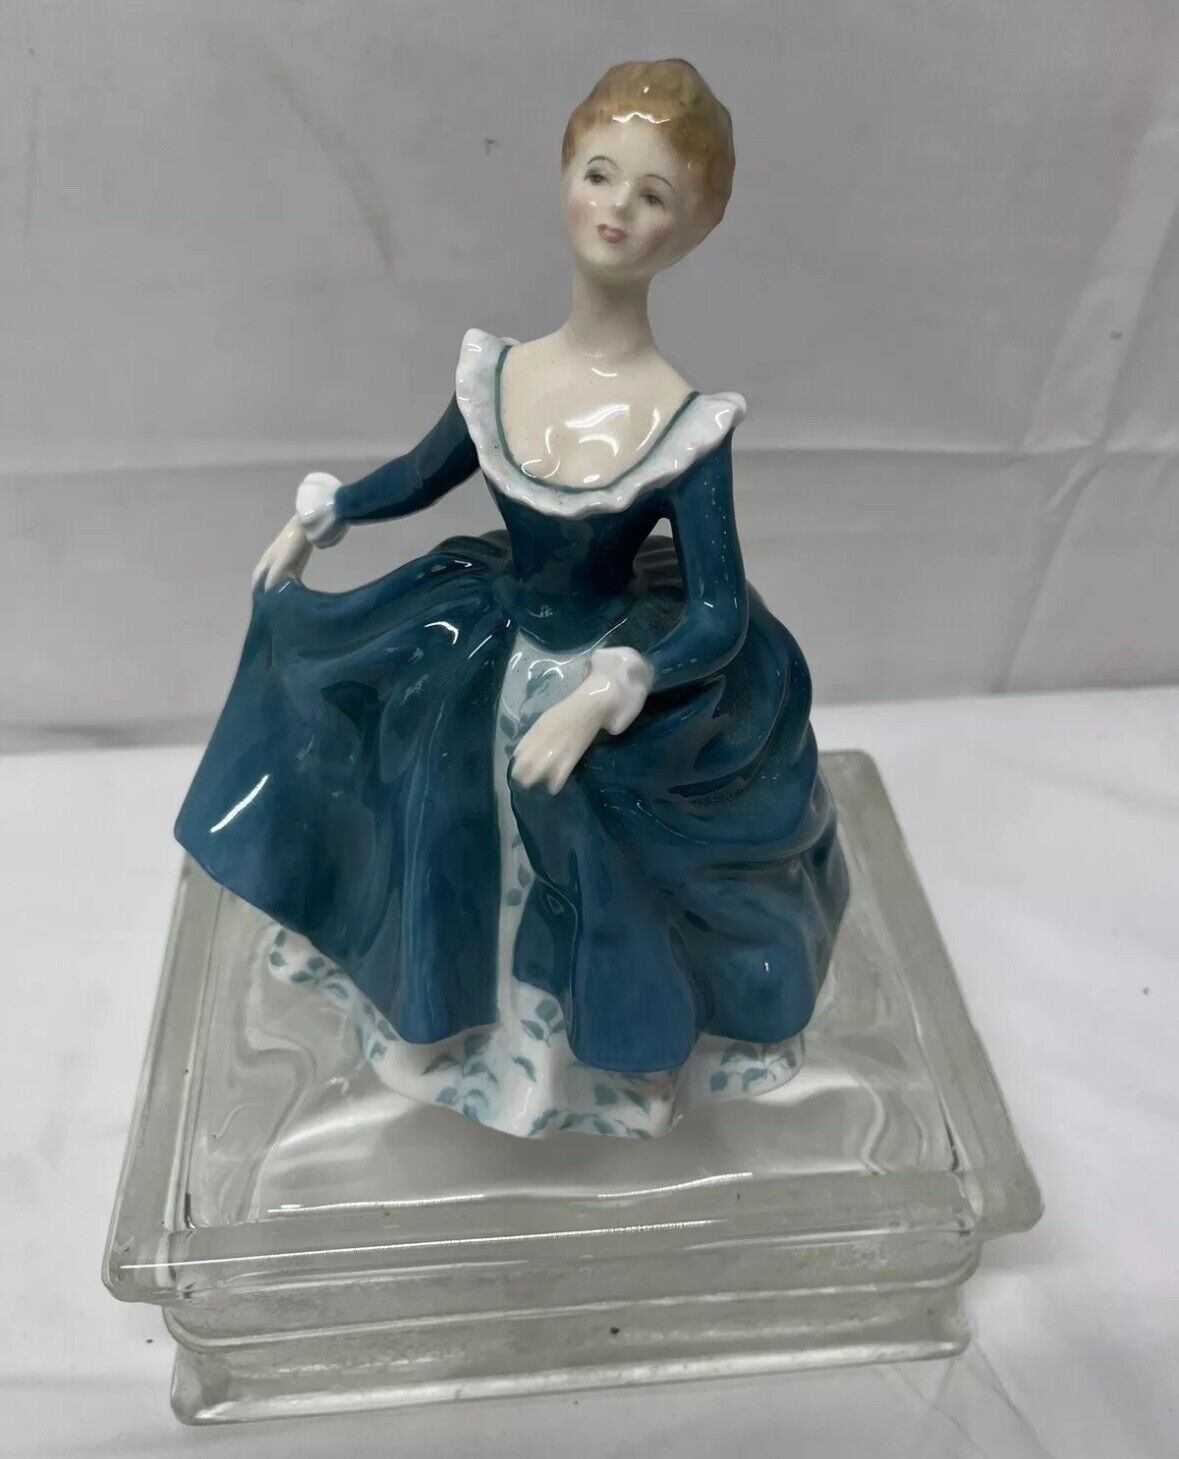 Royal Doulton Bone China Figurine Janine In Blue Gown 1970 HN2461 England 